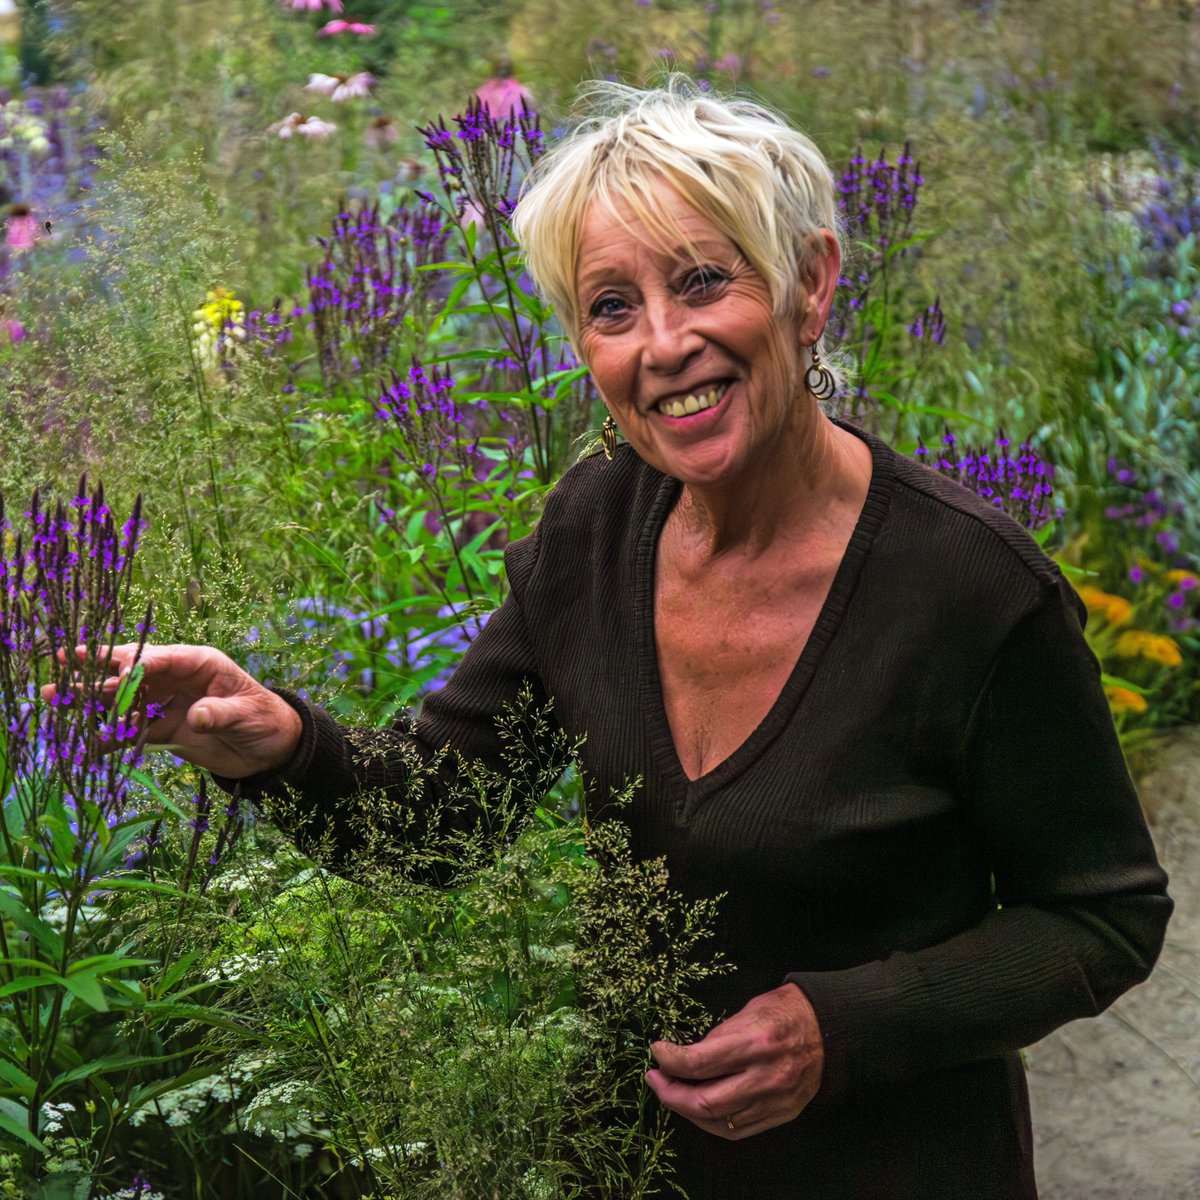 Carol's show garden at #RHSHamptonCourt was a triumph. We're SO proud of you, Carol! Thank you to everyone who helped to make it happen. You did a grand job 👏👏👏 #GardenersWorld #Gardening